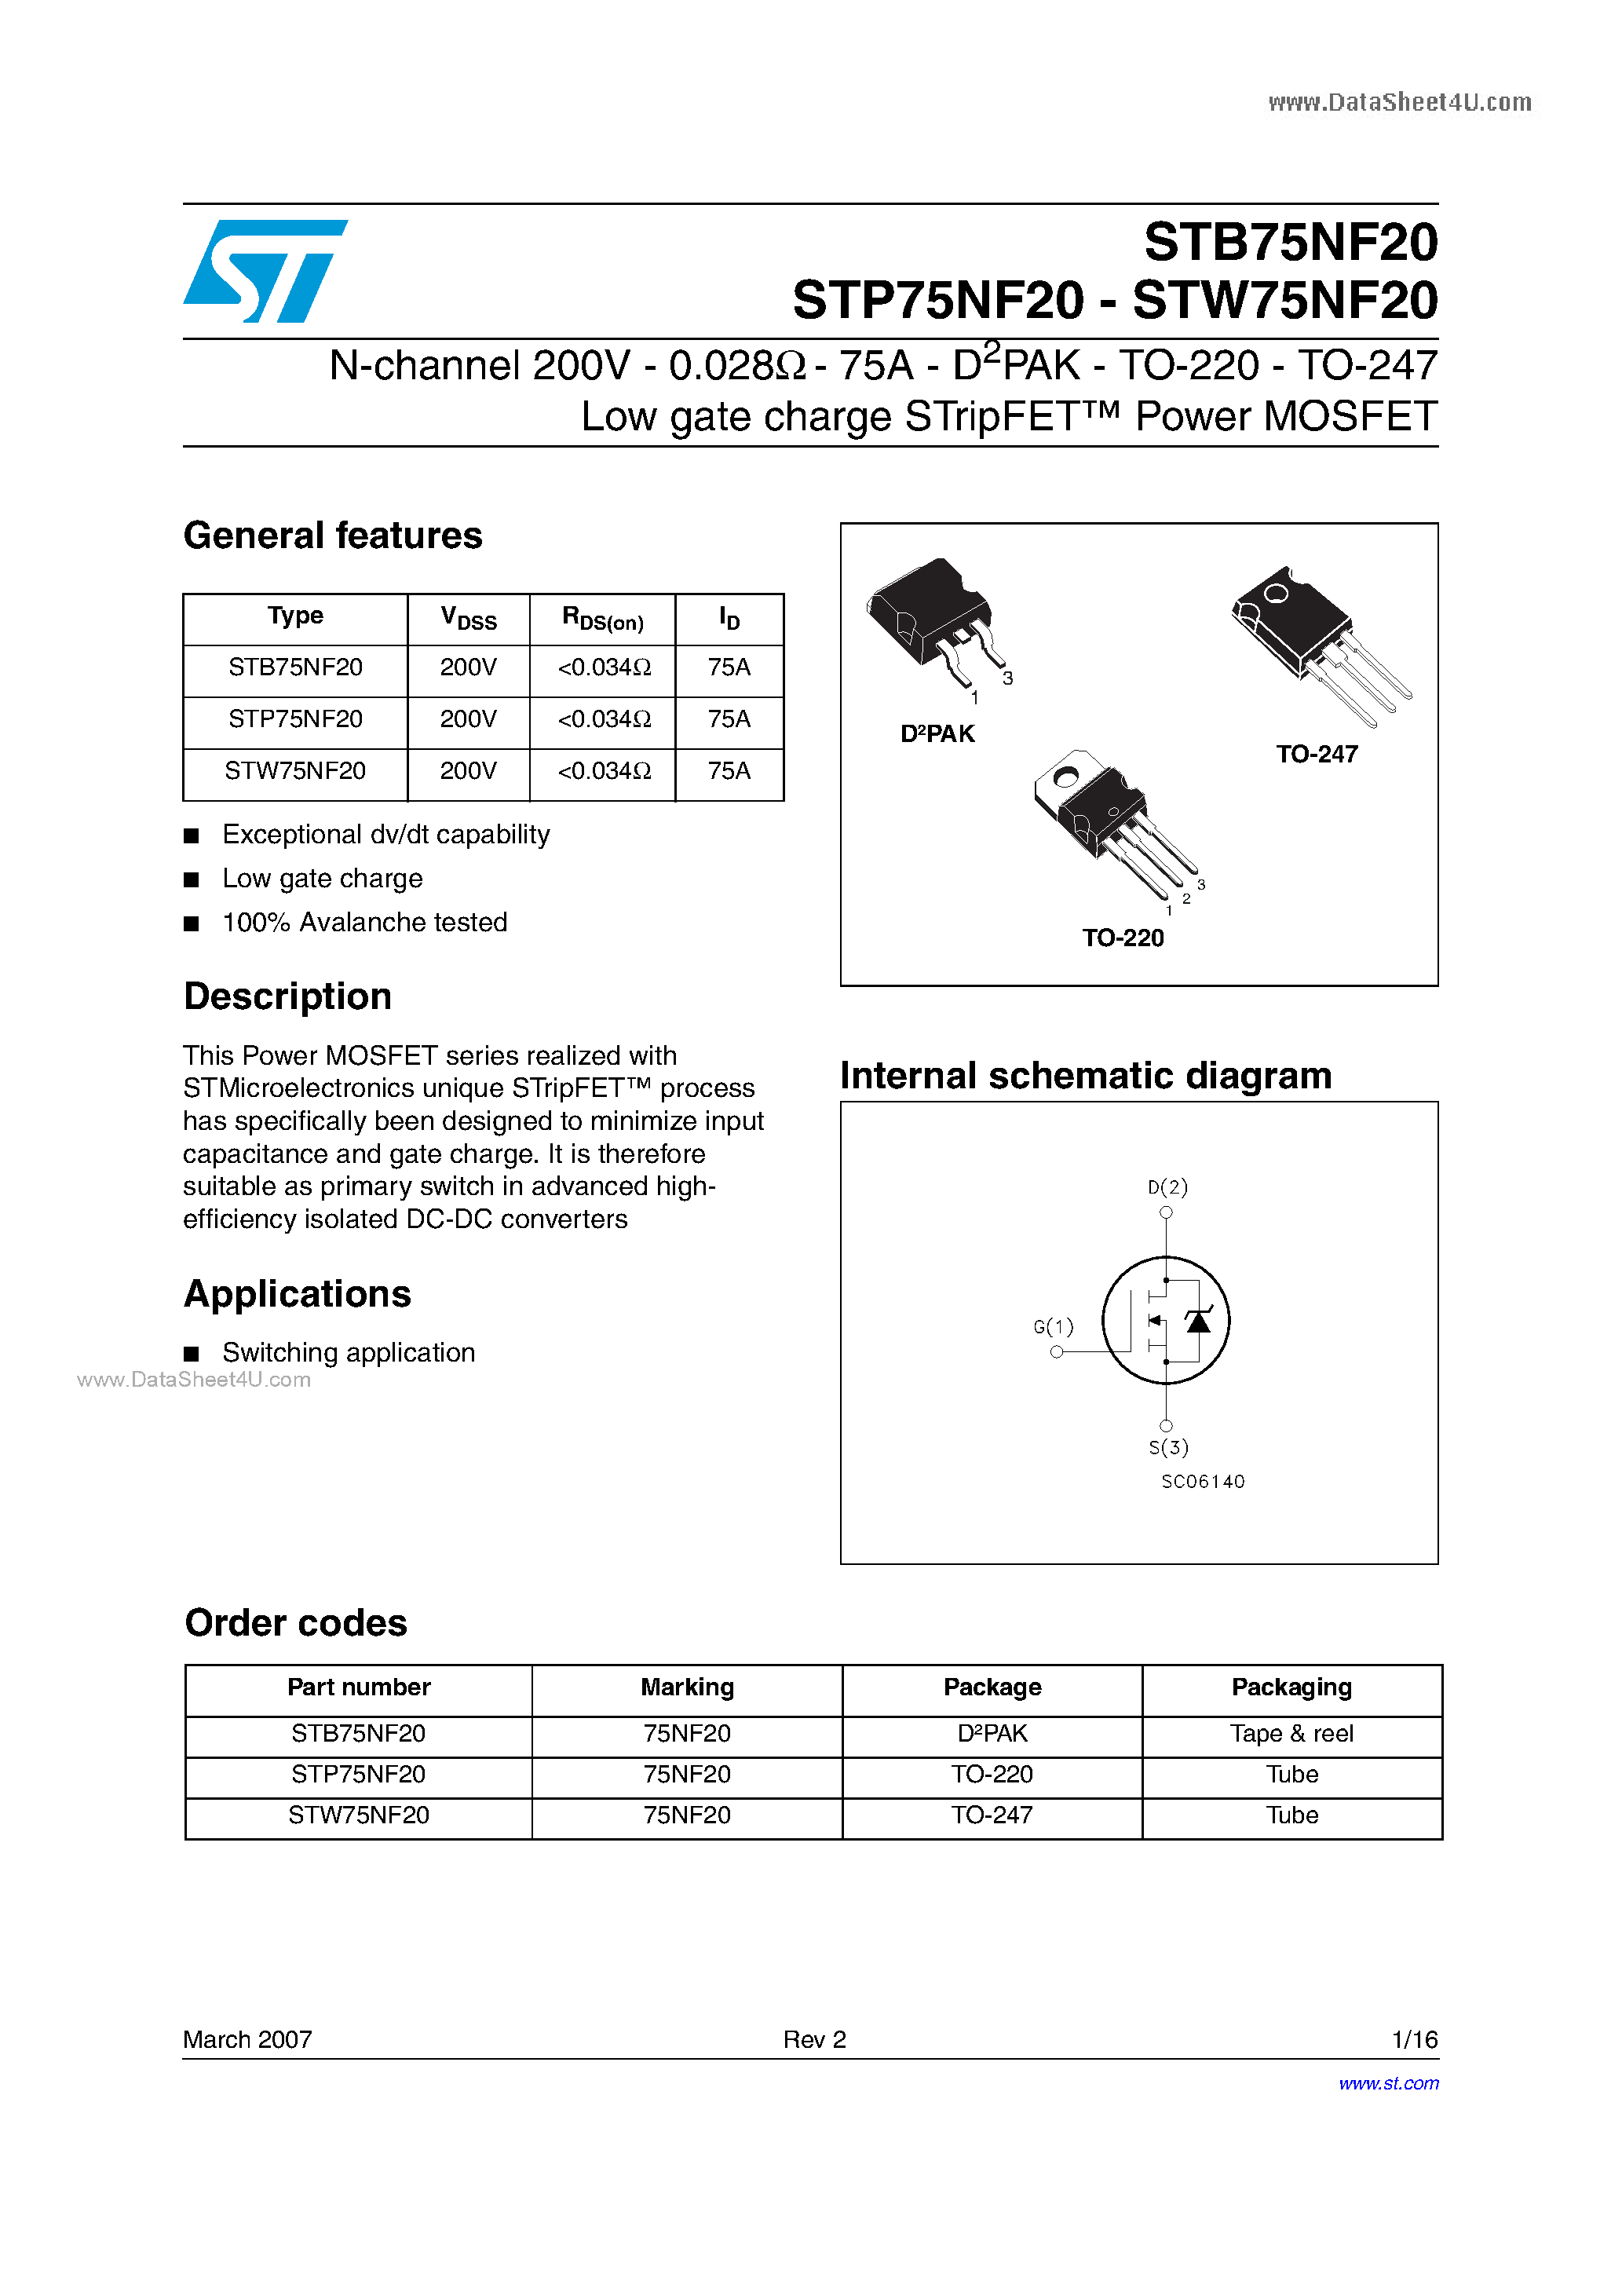 Datasheet 75NF20 - Search -----> STB75NF20 page 1